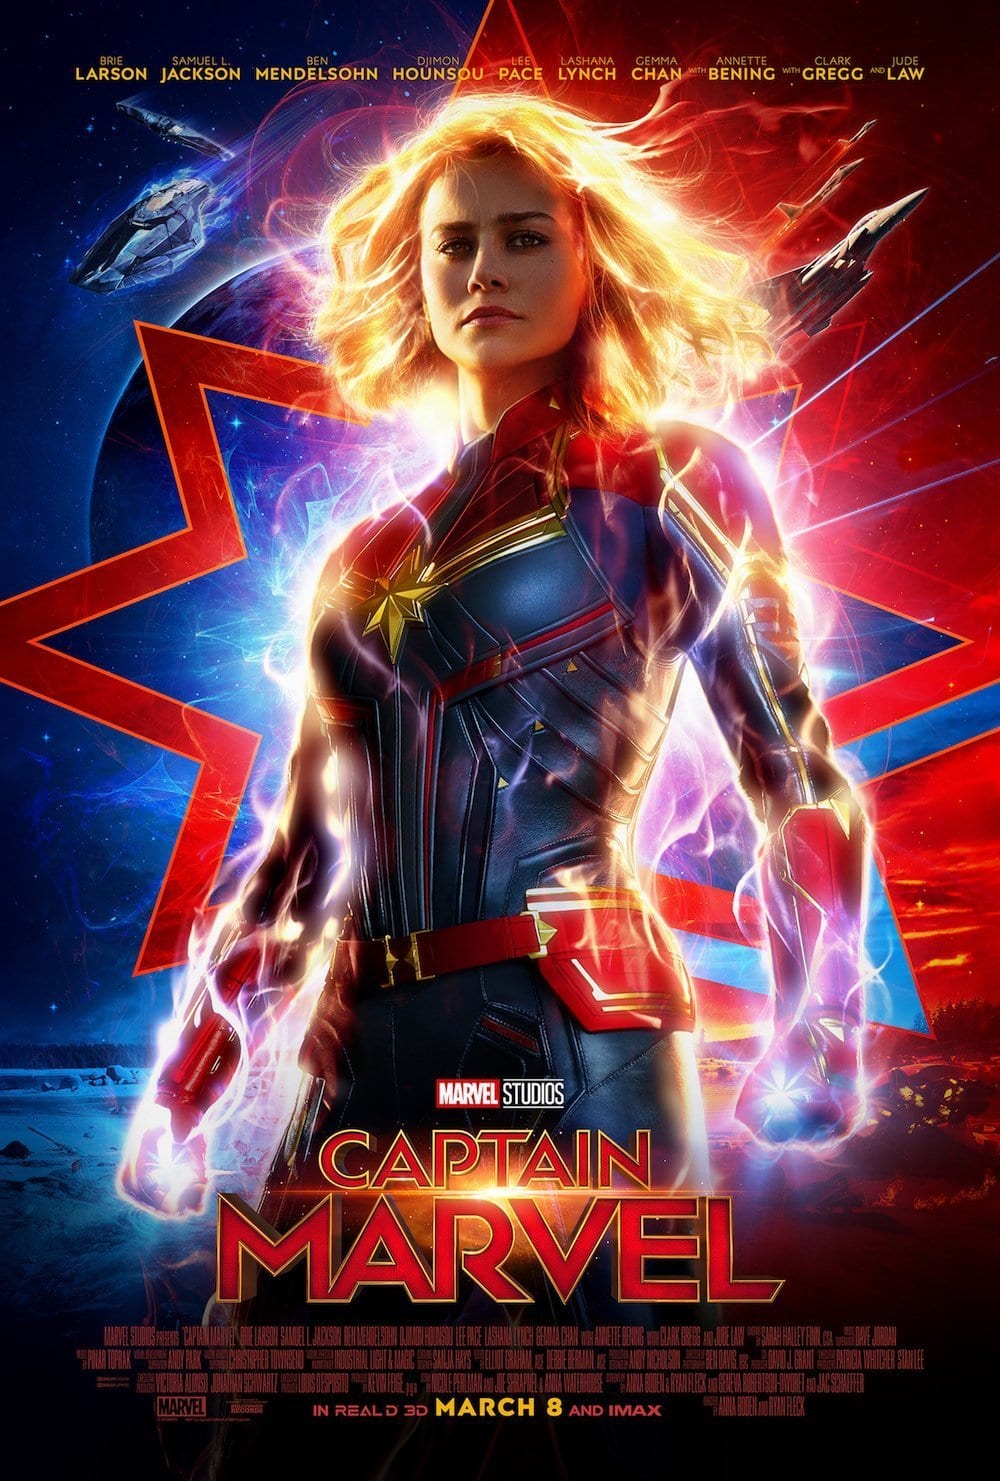 Brie Larson is featured on the poster for Captain Marvel